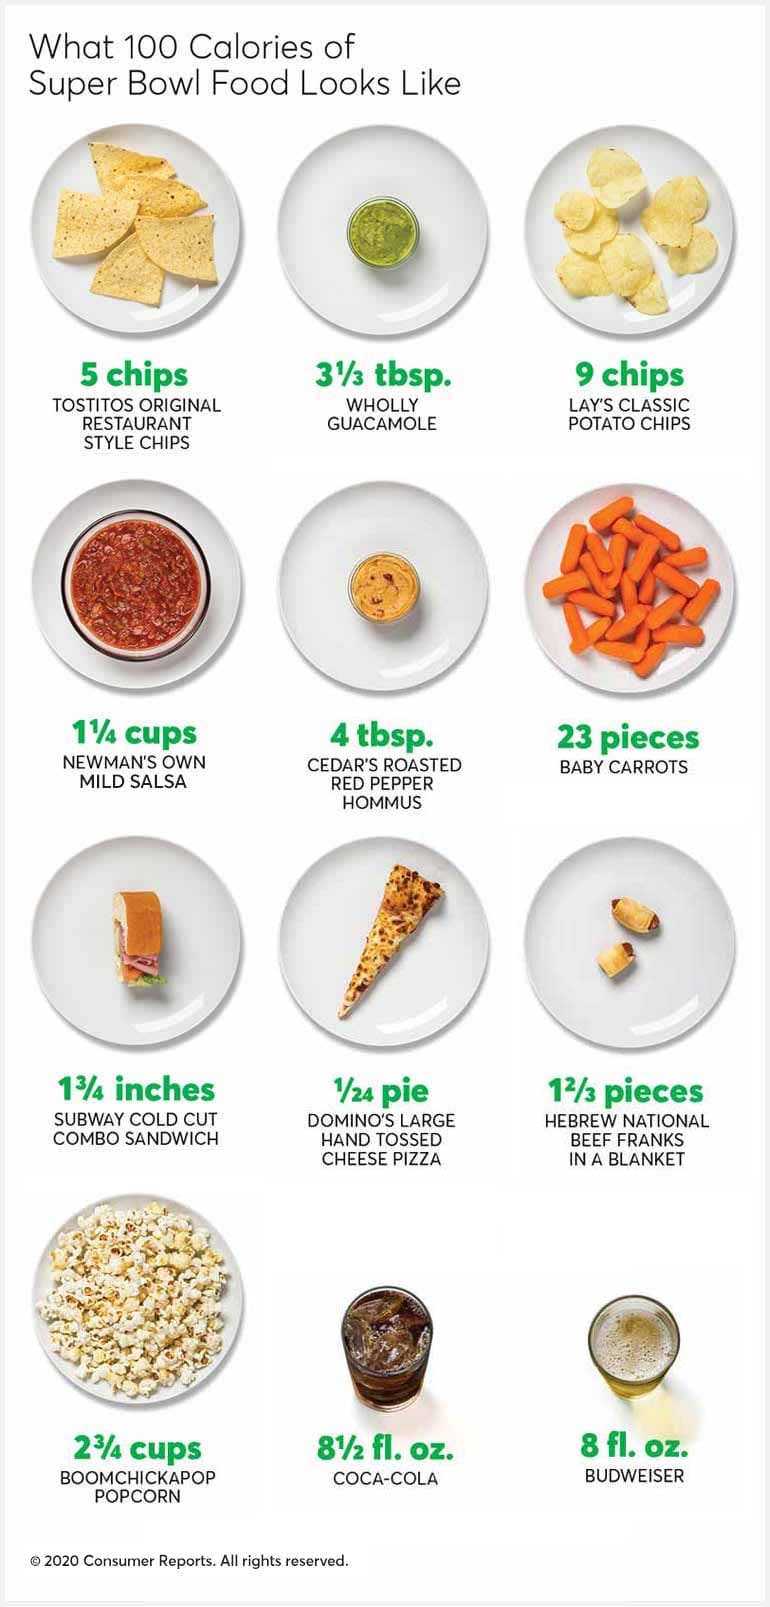 An image of several super bowl foods in 100-calorie portions.